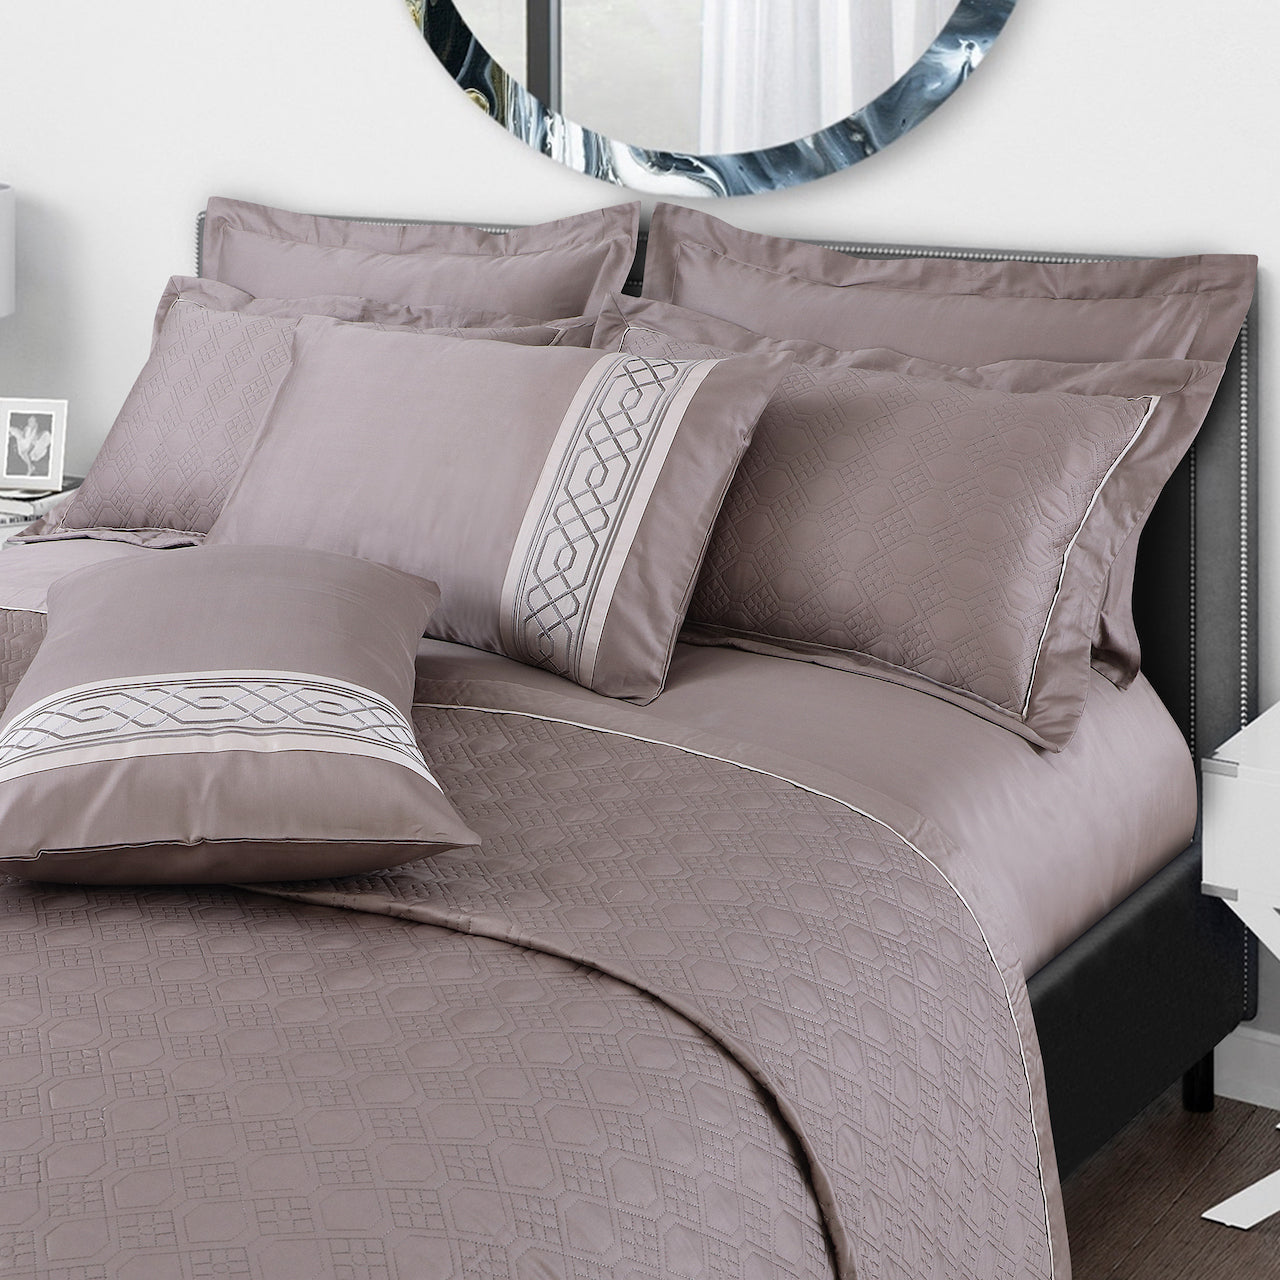 Kairo Quilted Bedcover - Taupe Brown